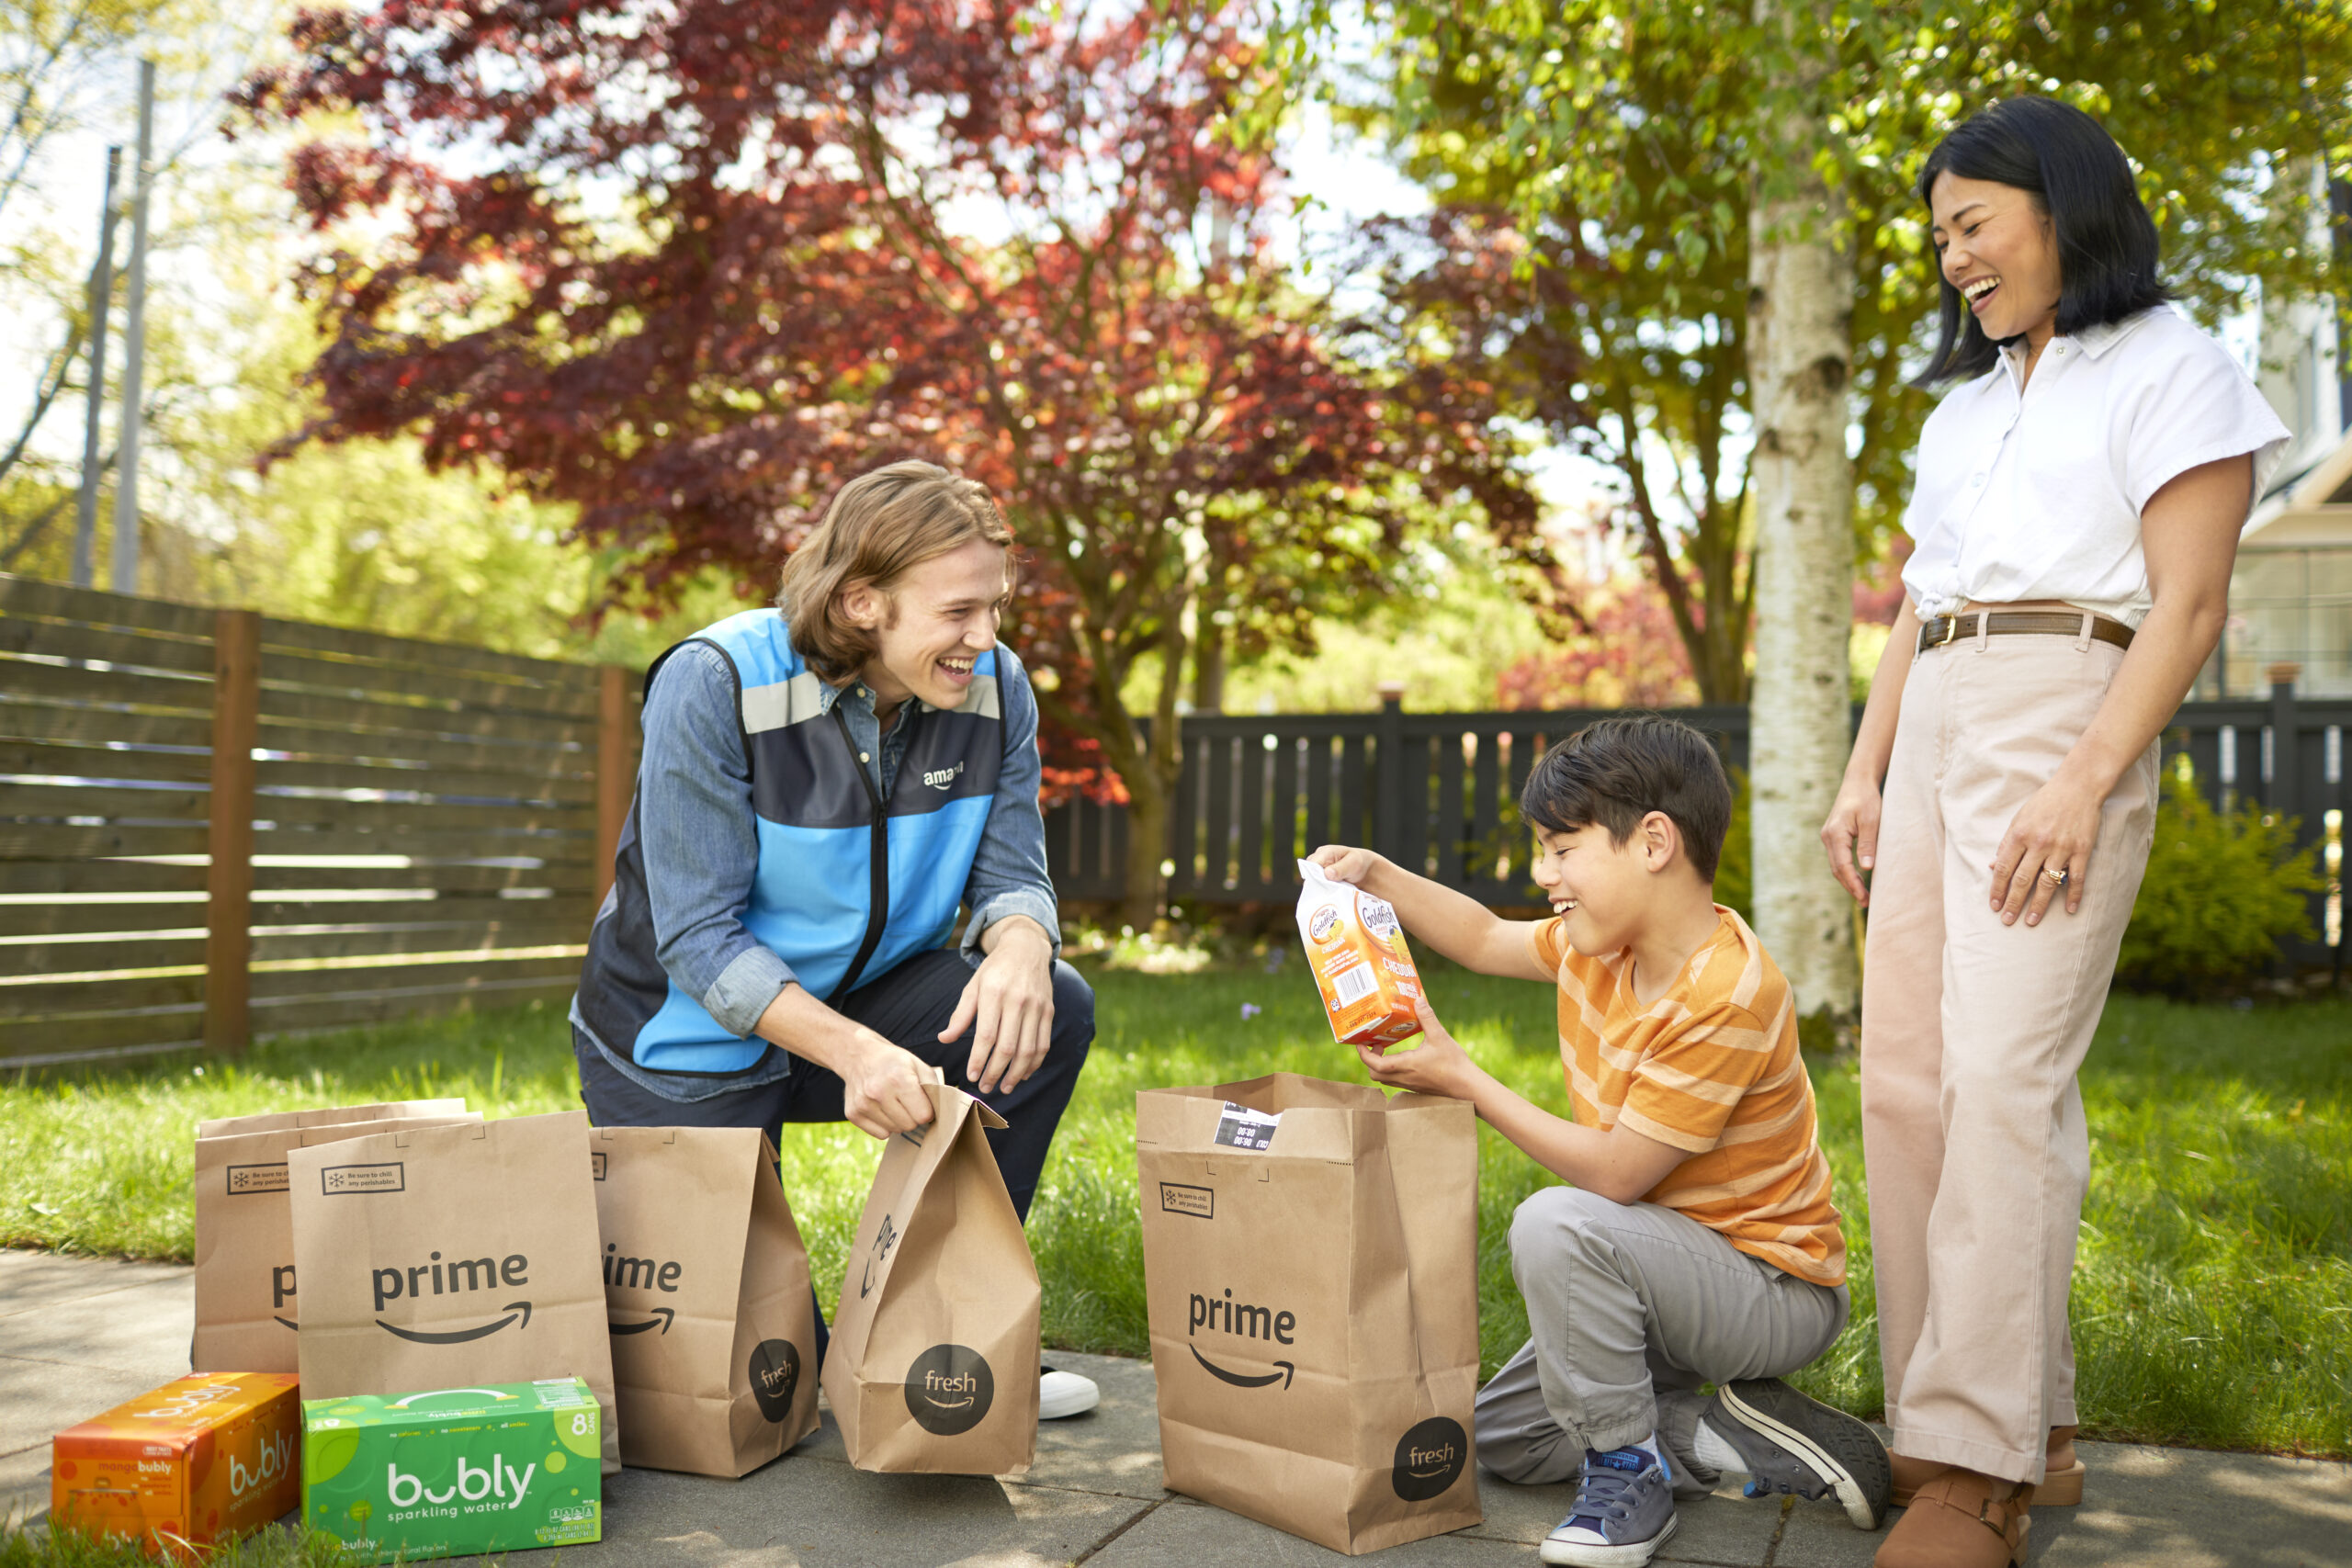 Amazon Tests a Flat Rate Fee For Unlimited Grocery Delivery